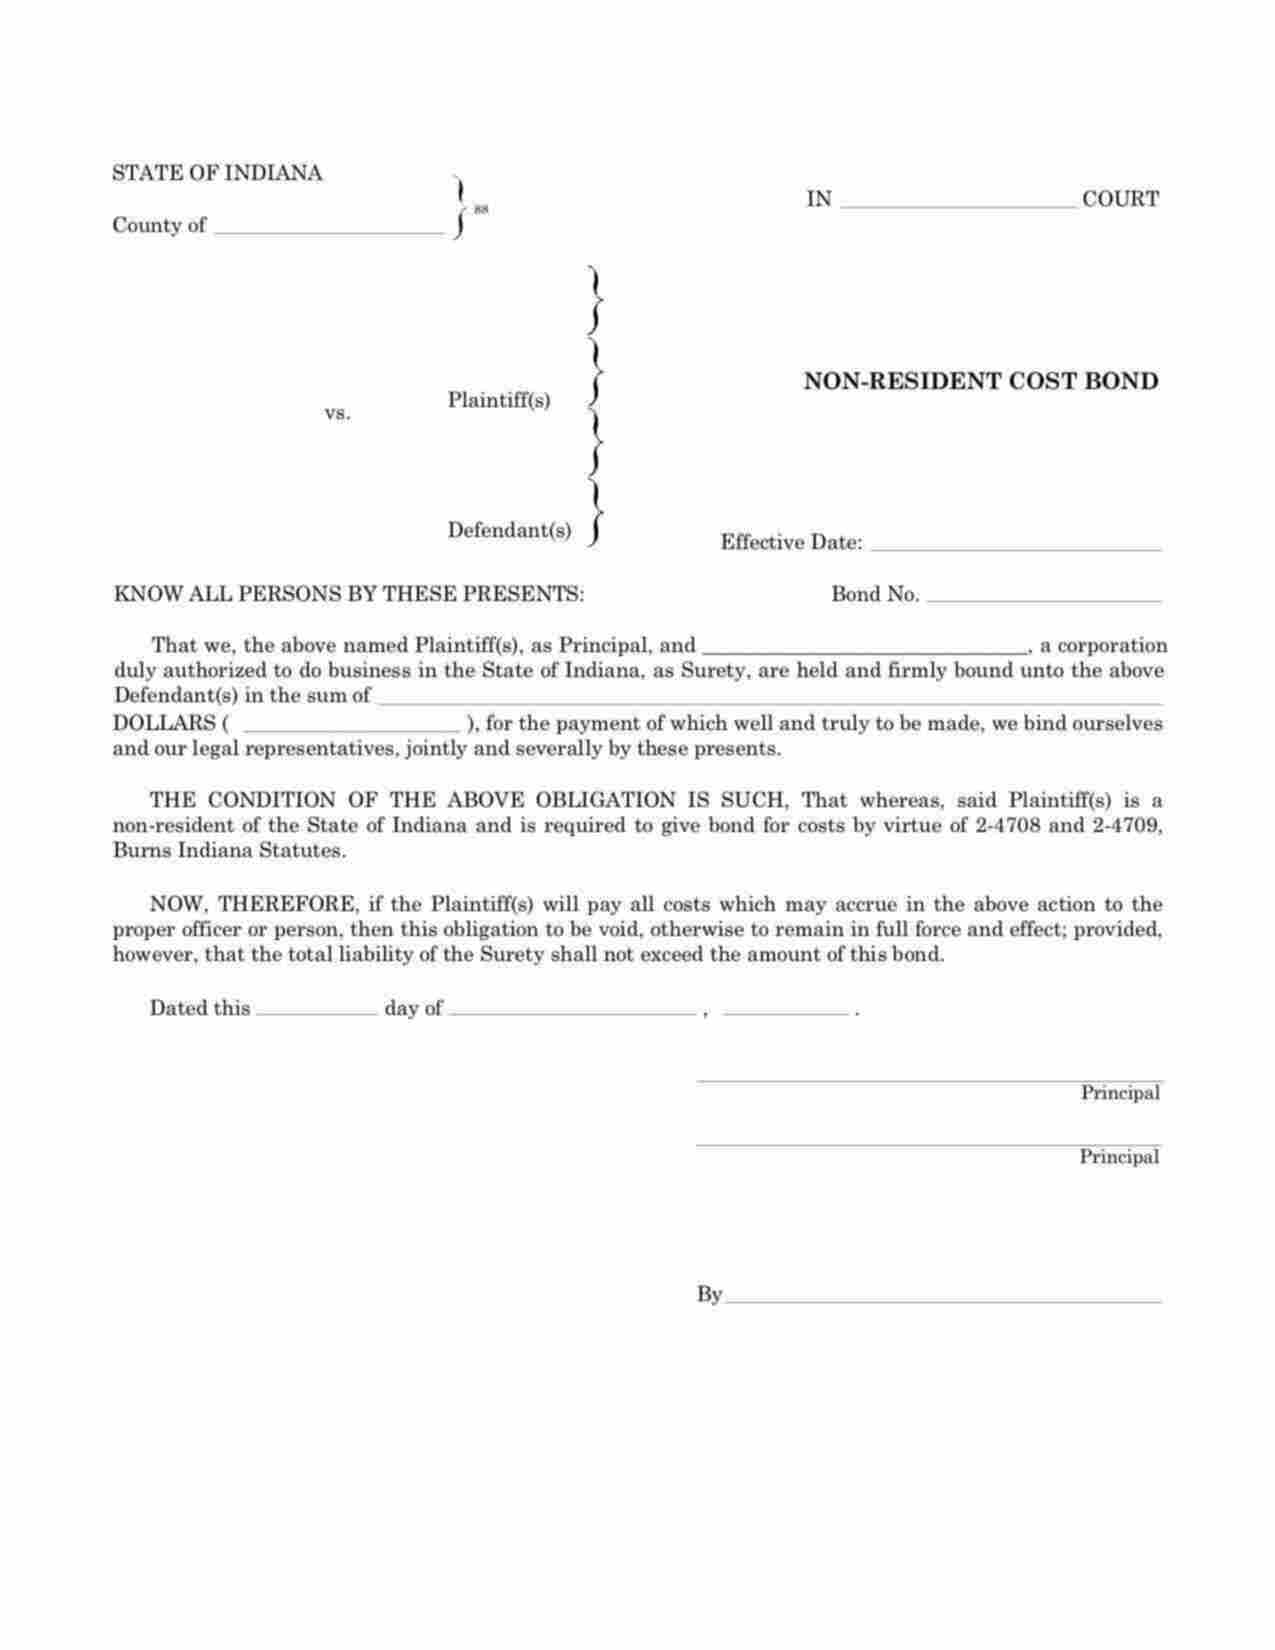 Indiana Non-Resident Cost Bond Form